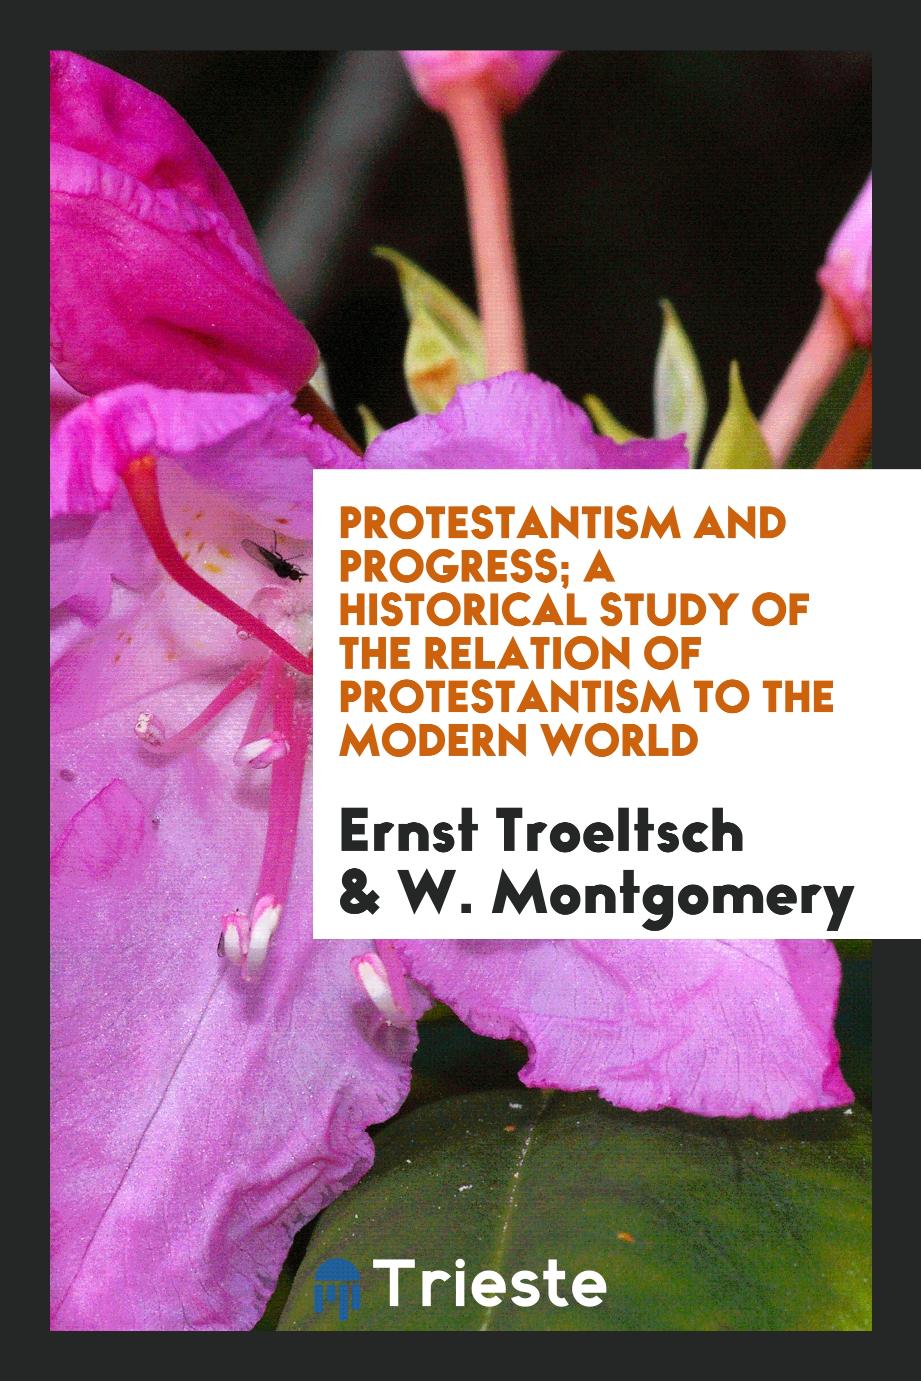 Protestantism and progress; a historical study of the relation of Protestantism to the modern world